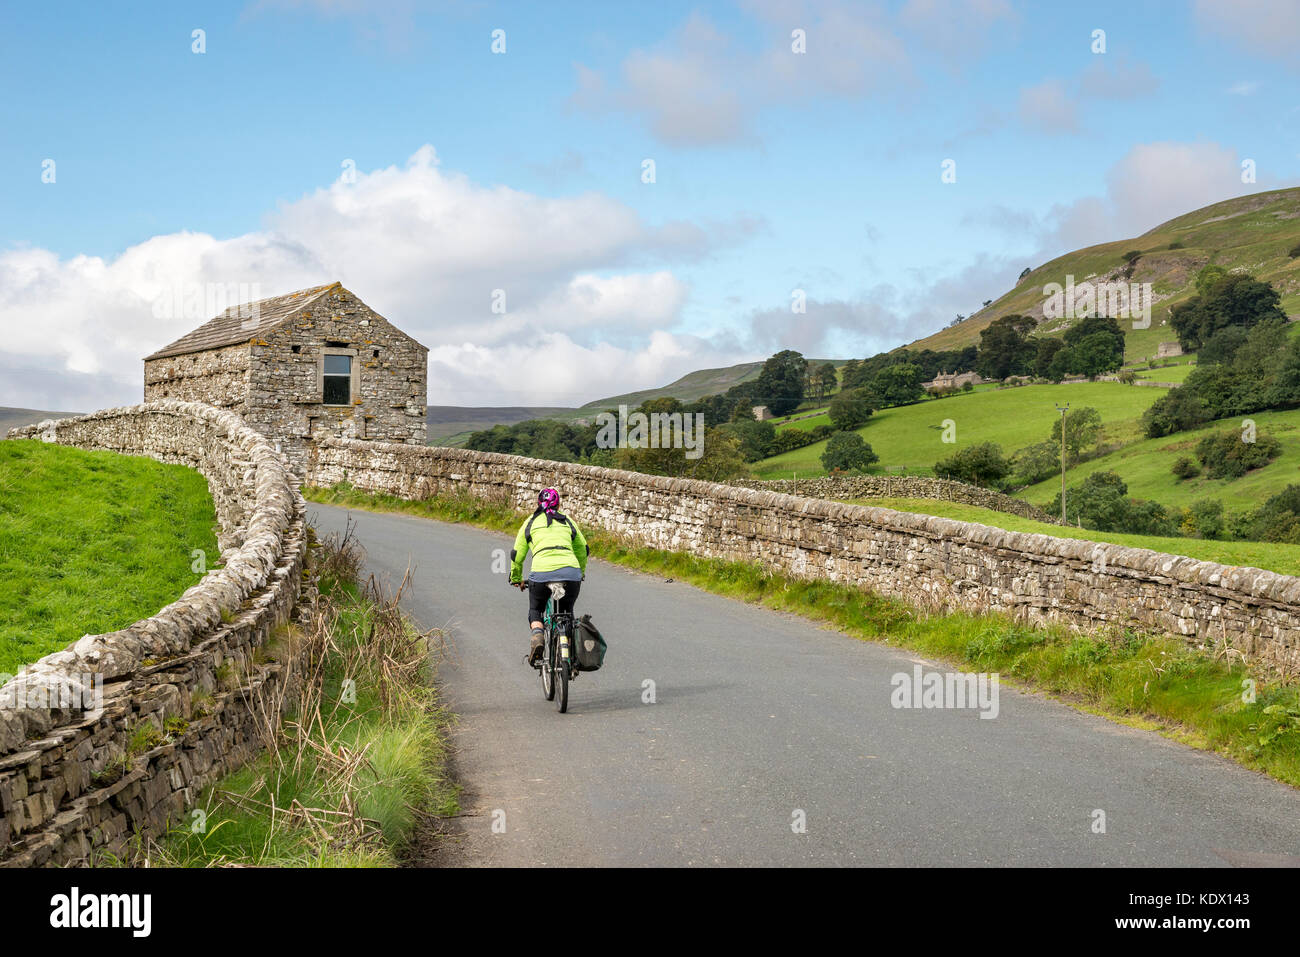 Cyclist on a country road near Muker in Swaledale, Yorkshire Dales national park, England. Stock Photo